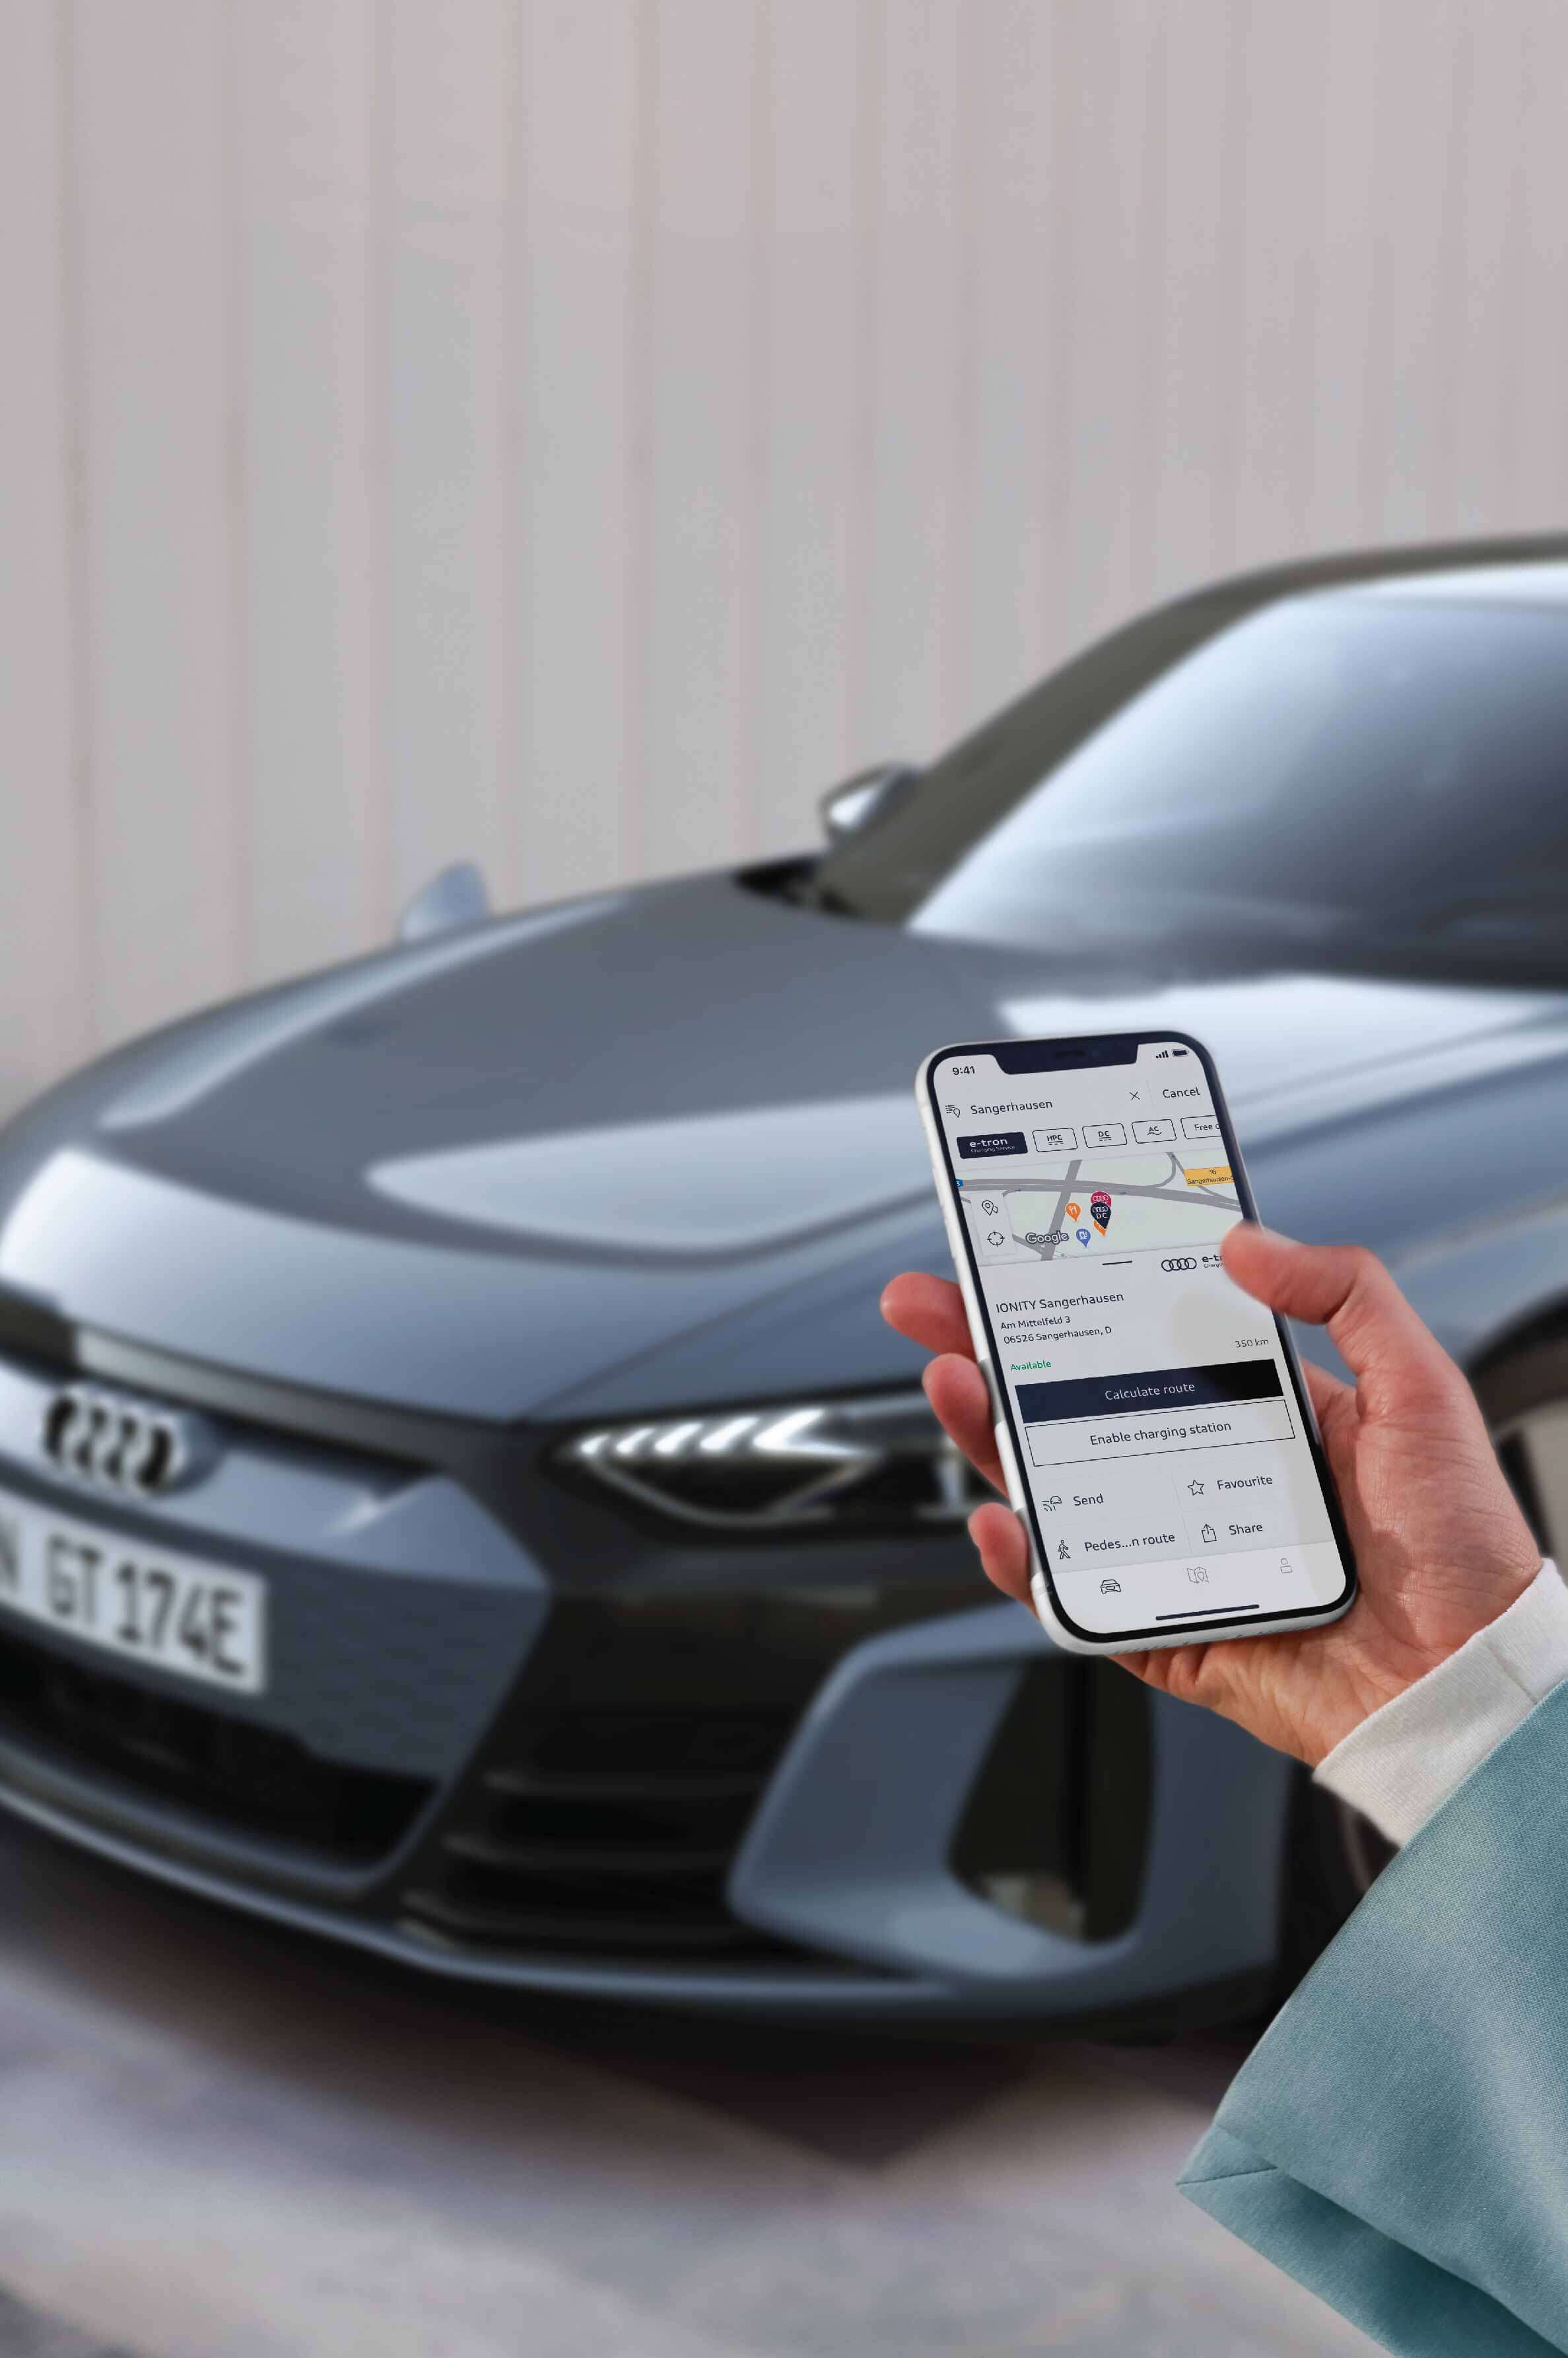 get access to your Audi remotely with Audi app